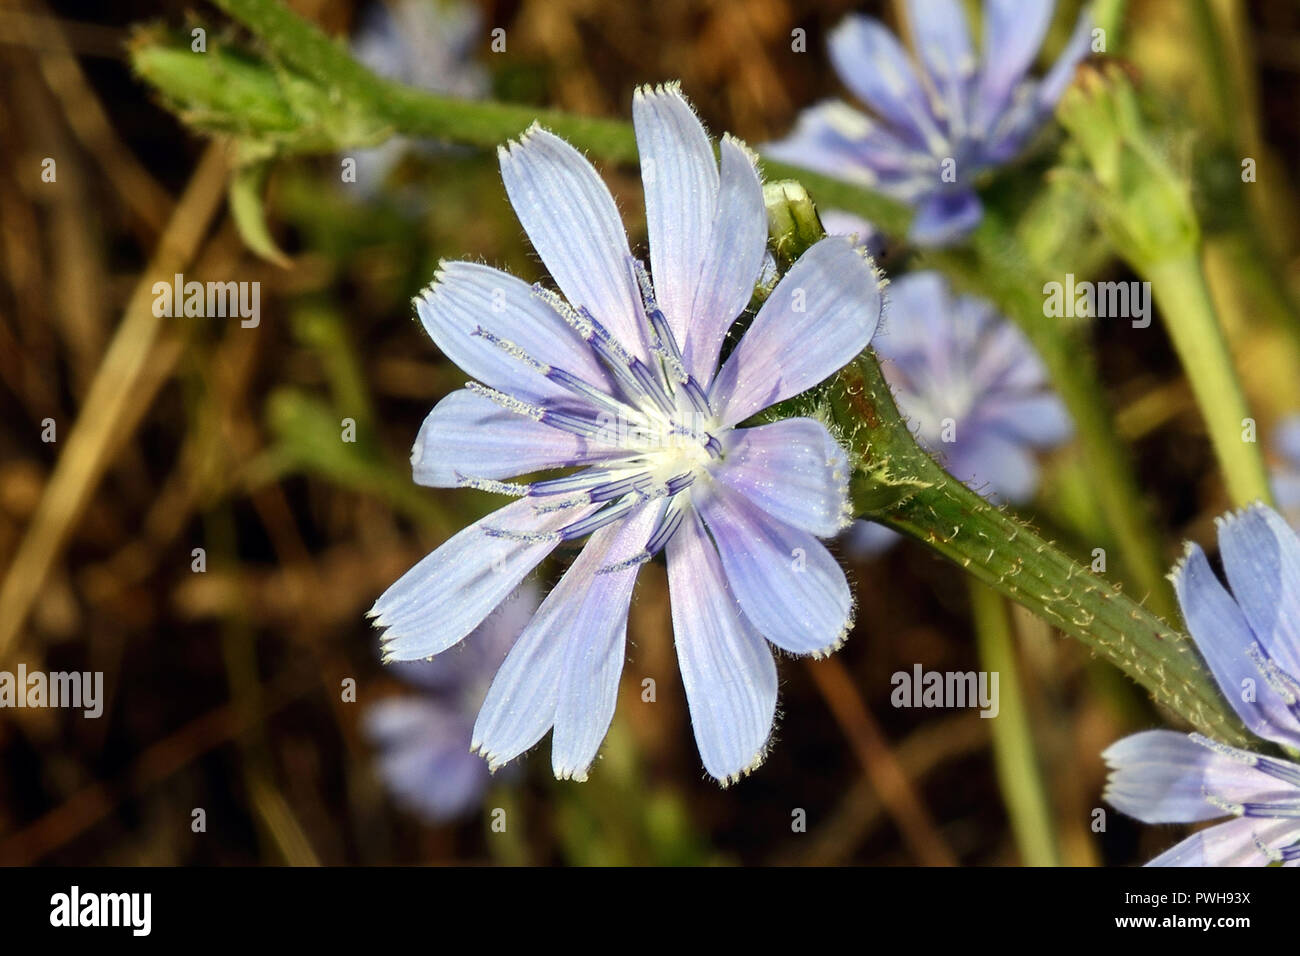 Cichorium intybus (chicory) is a European species typically found on roadsides but now widely cultivated for its edible leaves and roots. Stock Photo